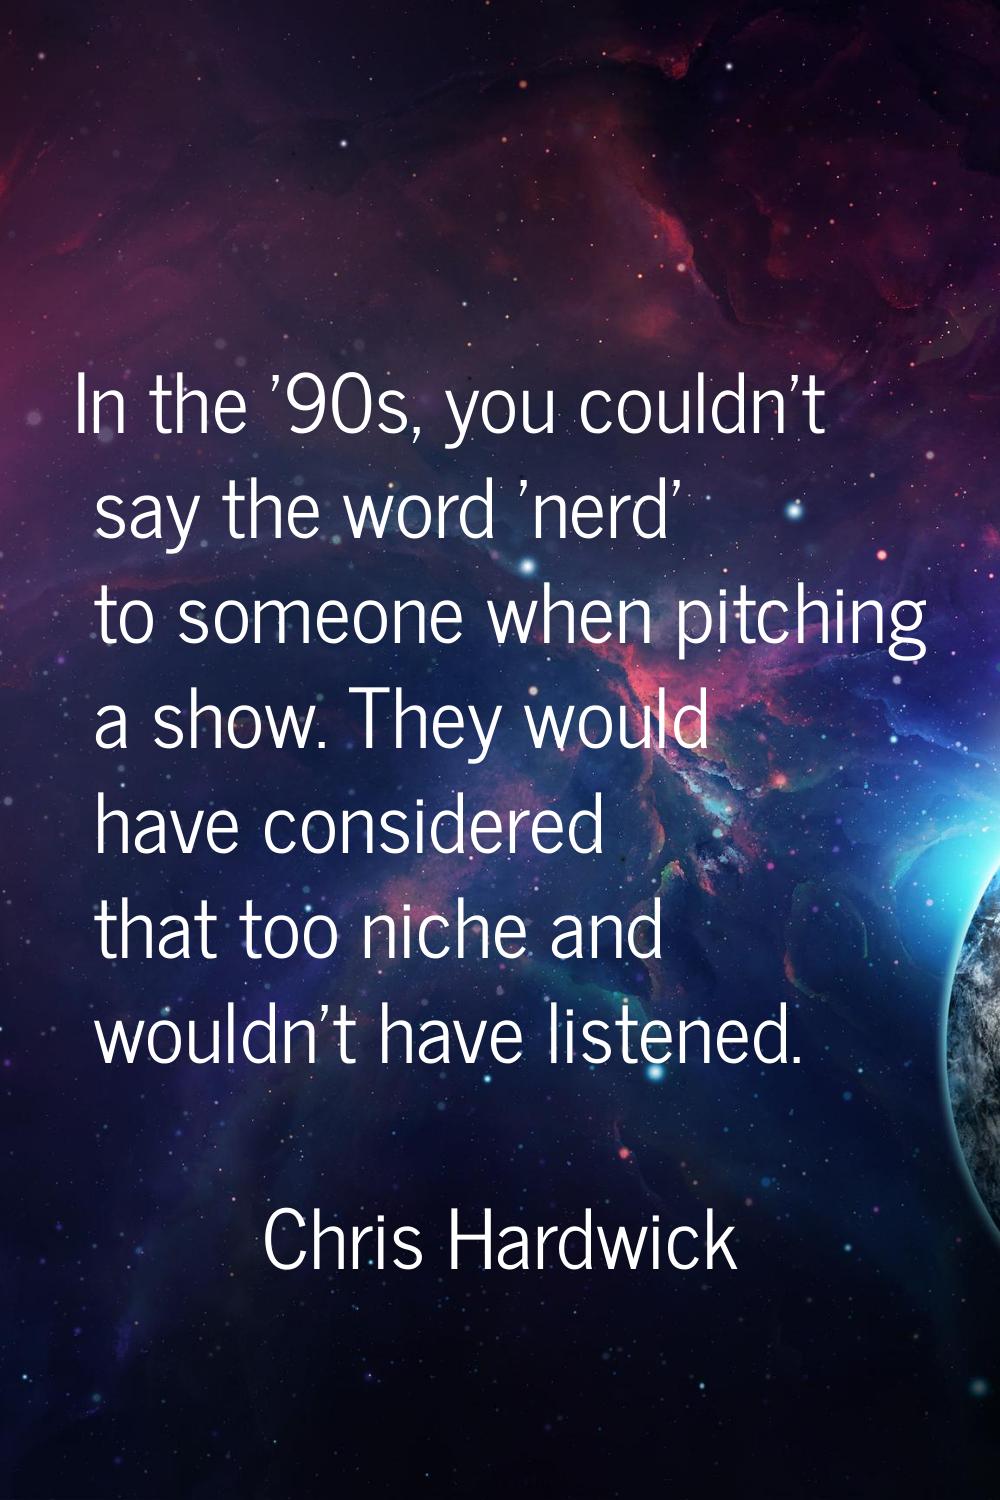 In the '90s, you couldn't say the word 'nerd' to someone when pitching a show. They would have cons